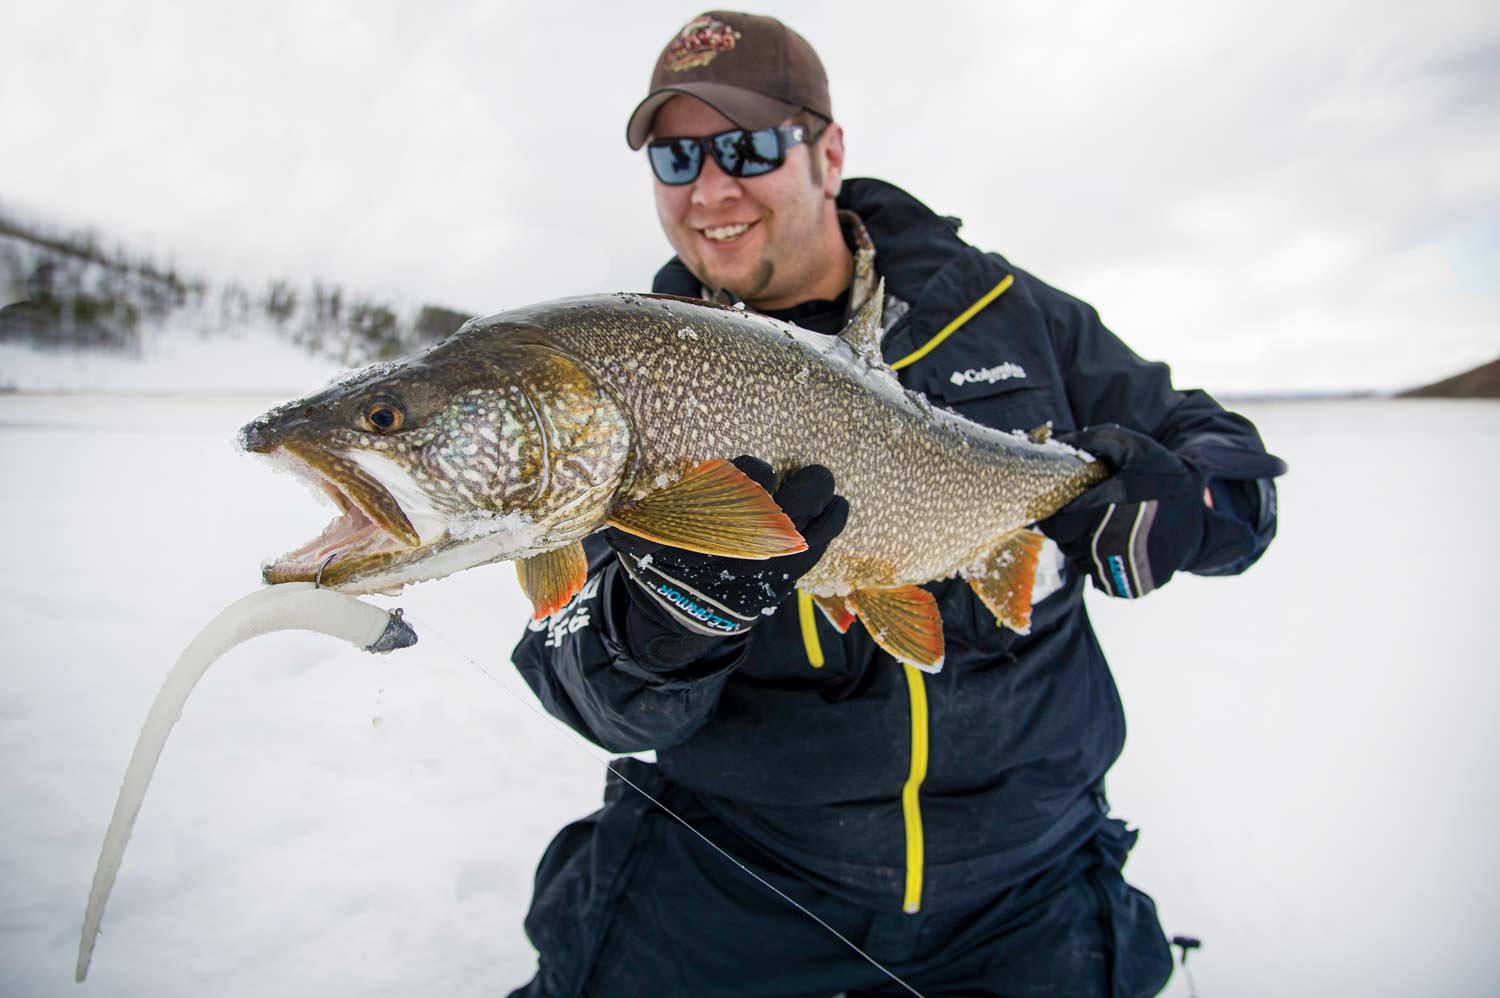 Joe Cermele with a heavy lake trout from Lake Granby in Colorado.